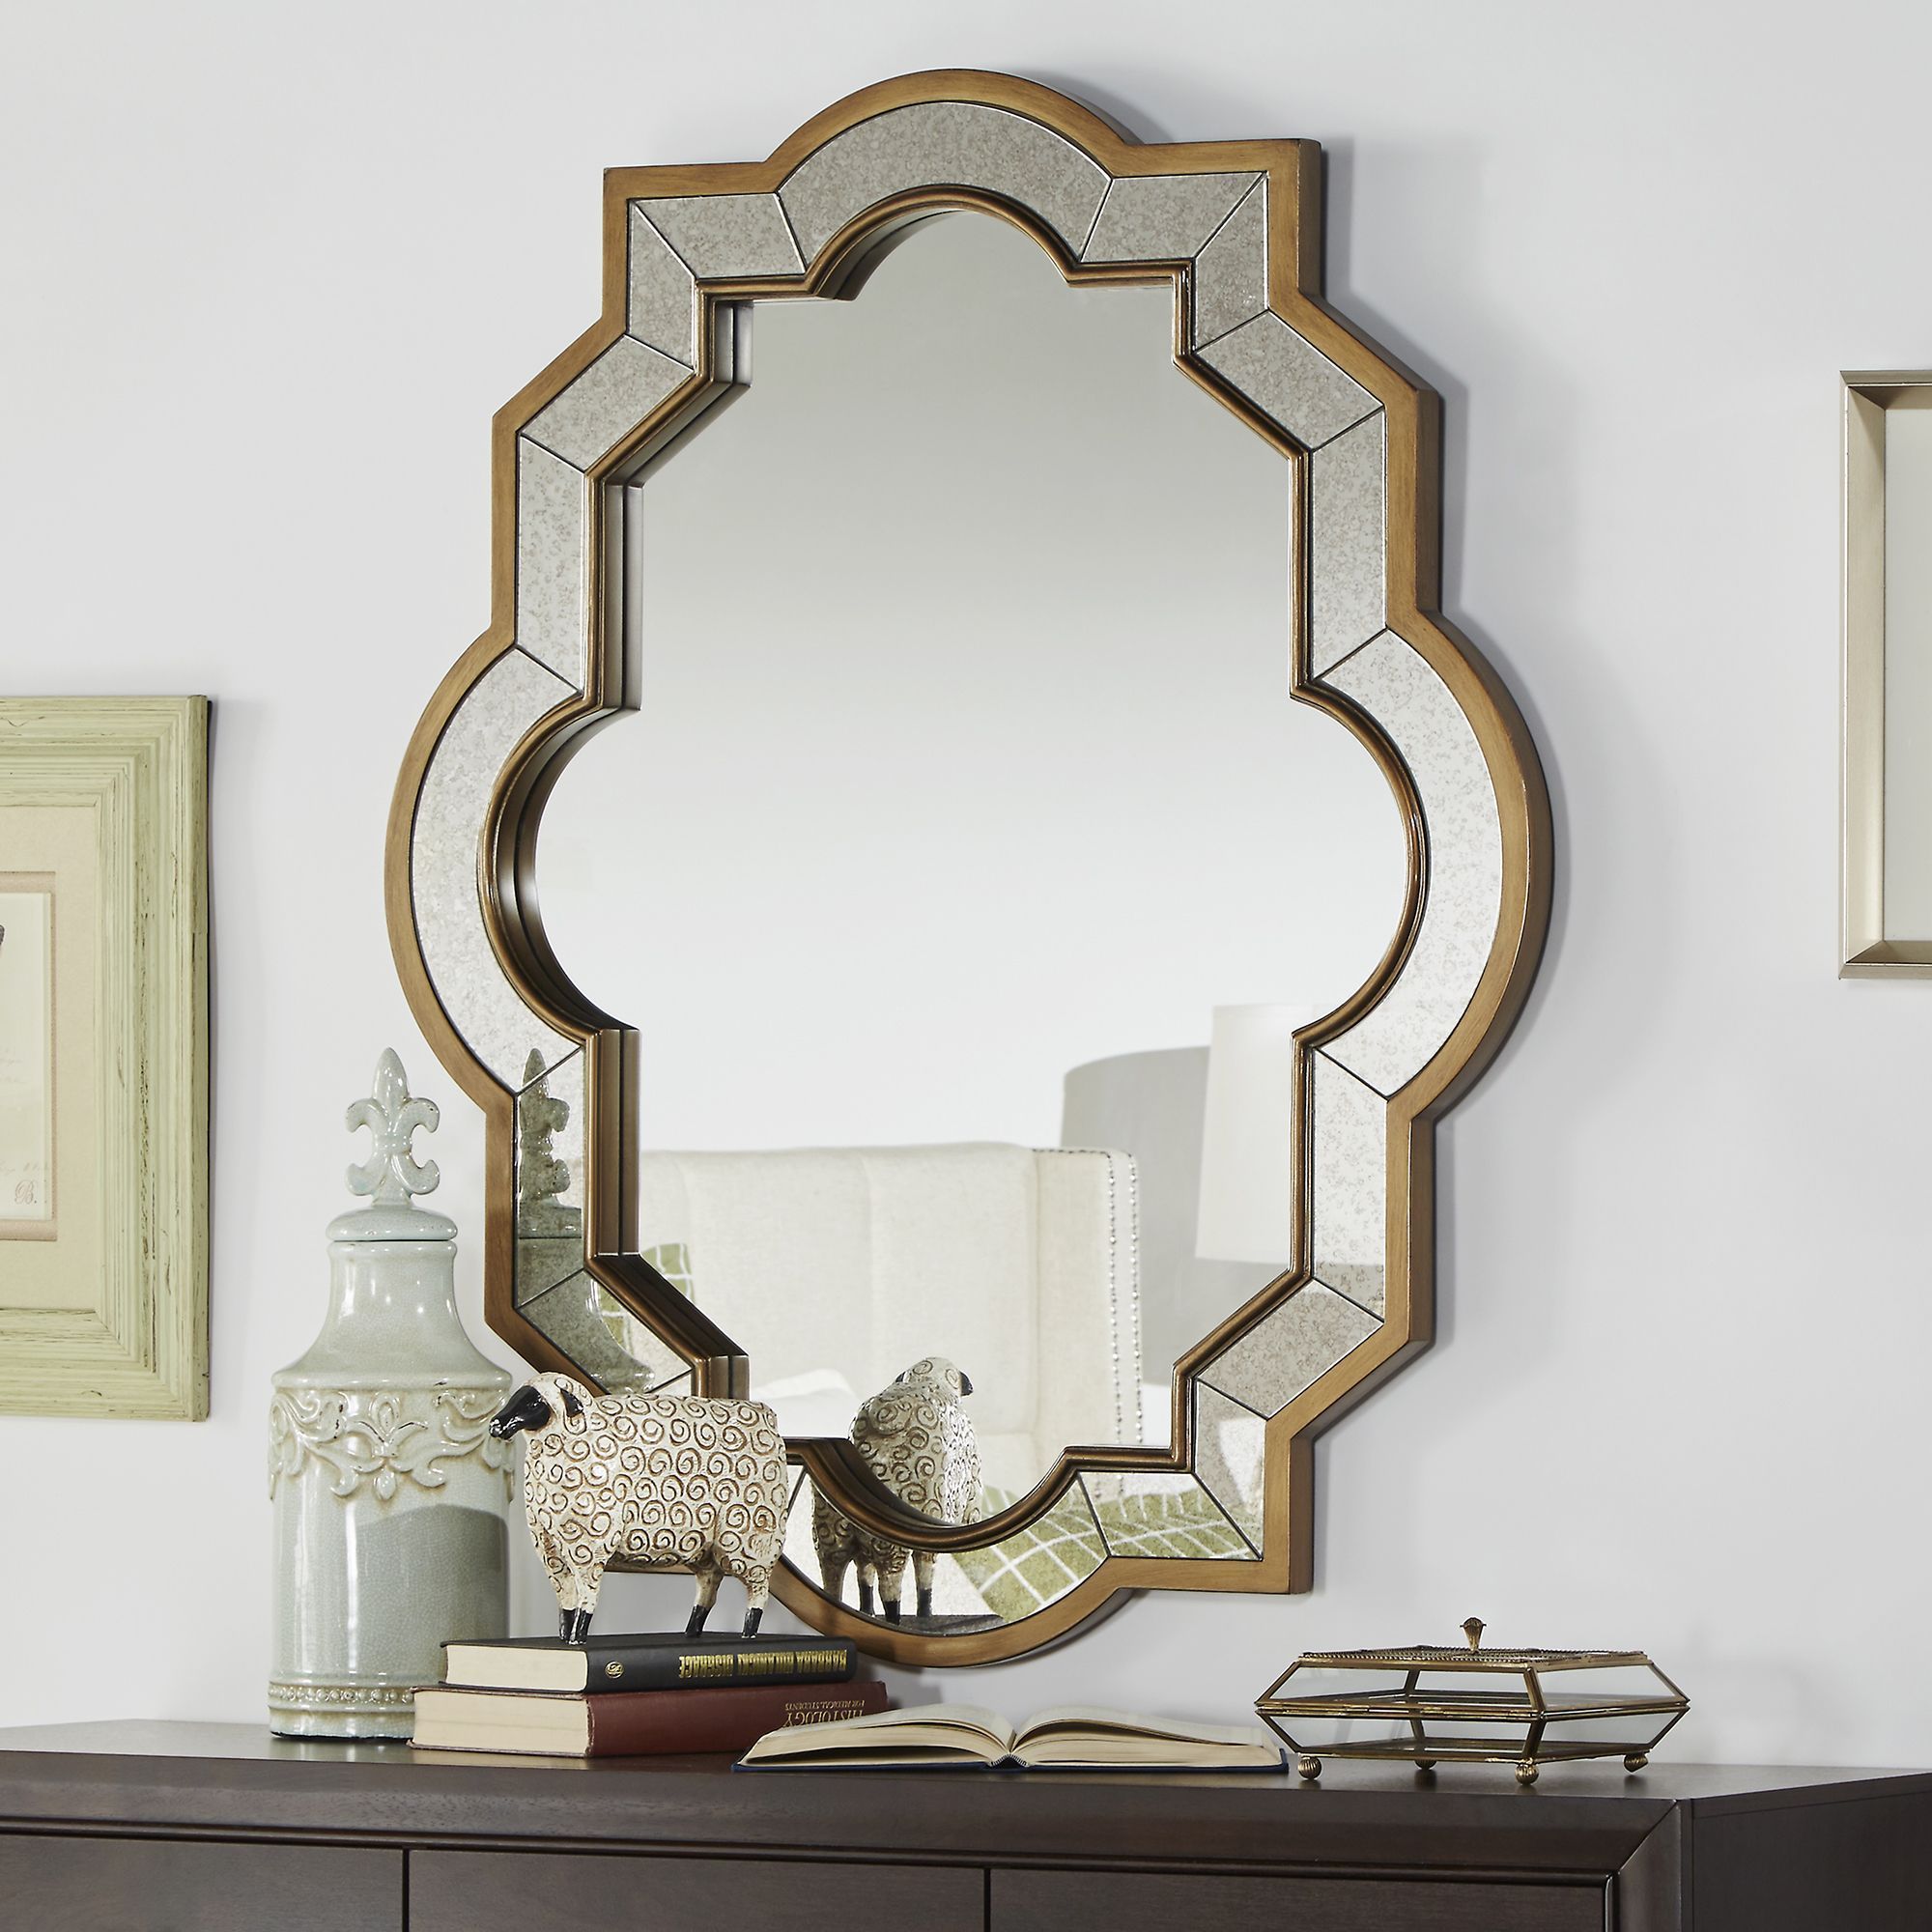 Mirrors | Mirror Wall, Decorative Bathroom Mirrors, Mirror Wall Decor Inside Booth Reclaimed Wall Mirrors Accent (View 3 of 15)